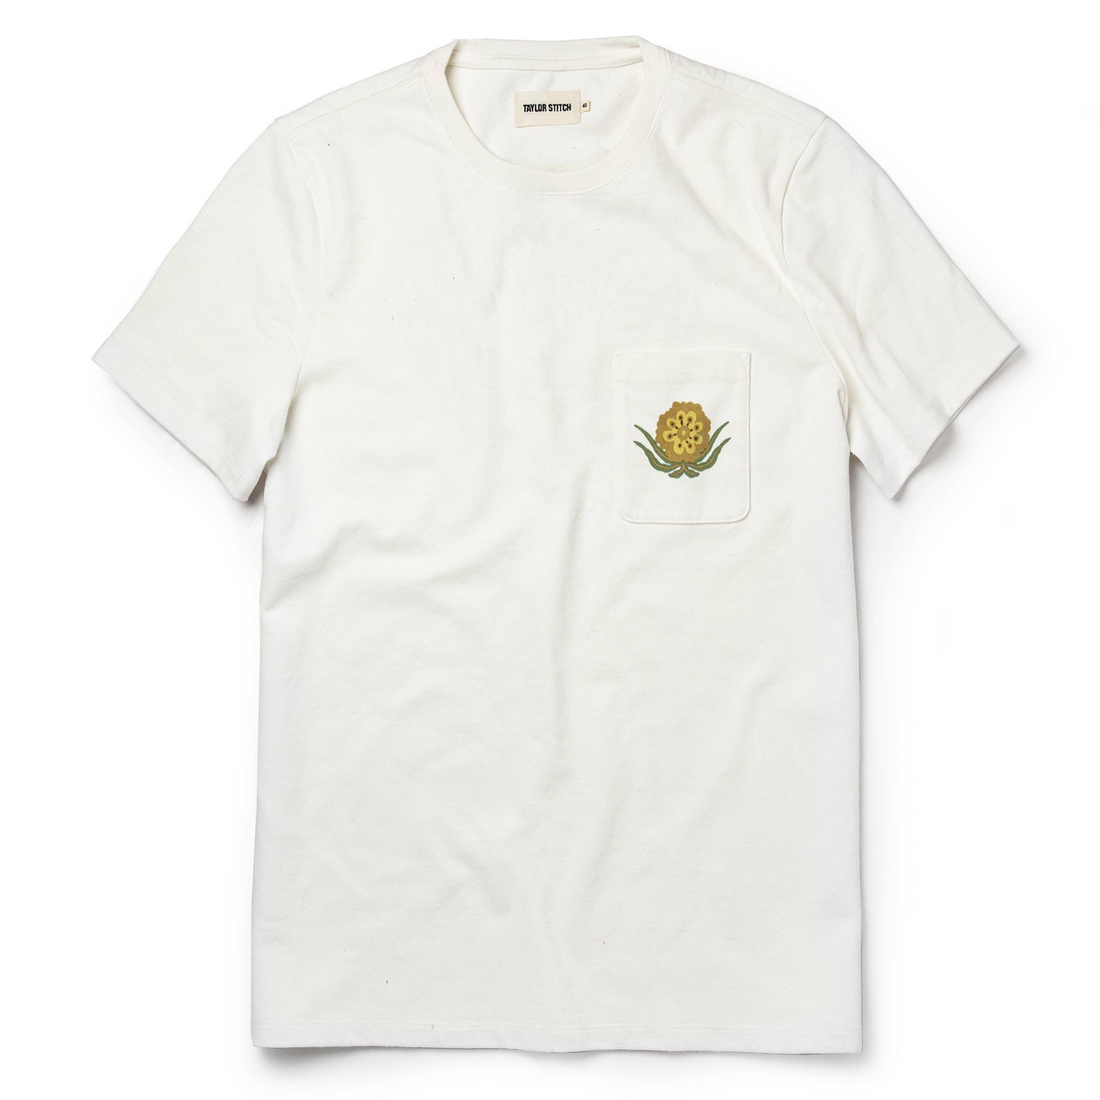 Taylor Stitch - The Heavy Bag Tee in Desert Flower